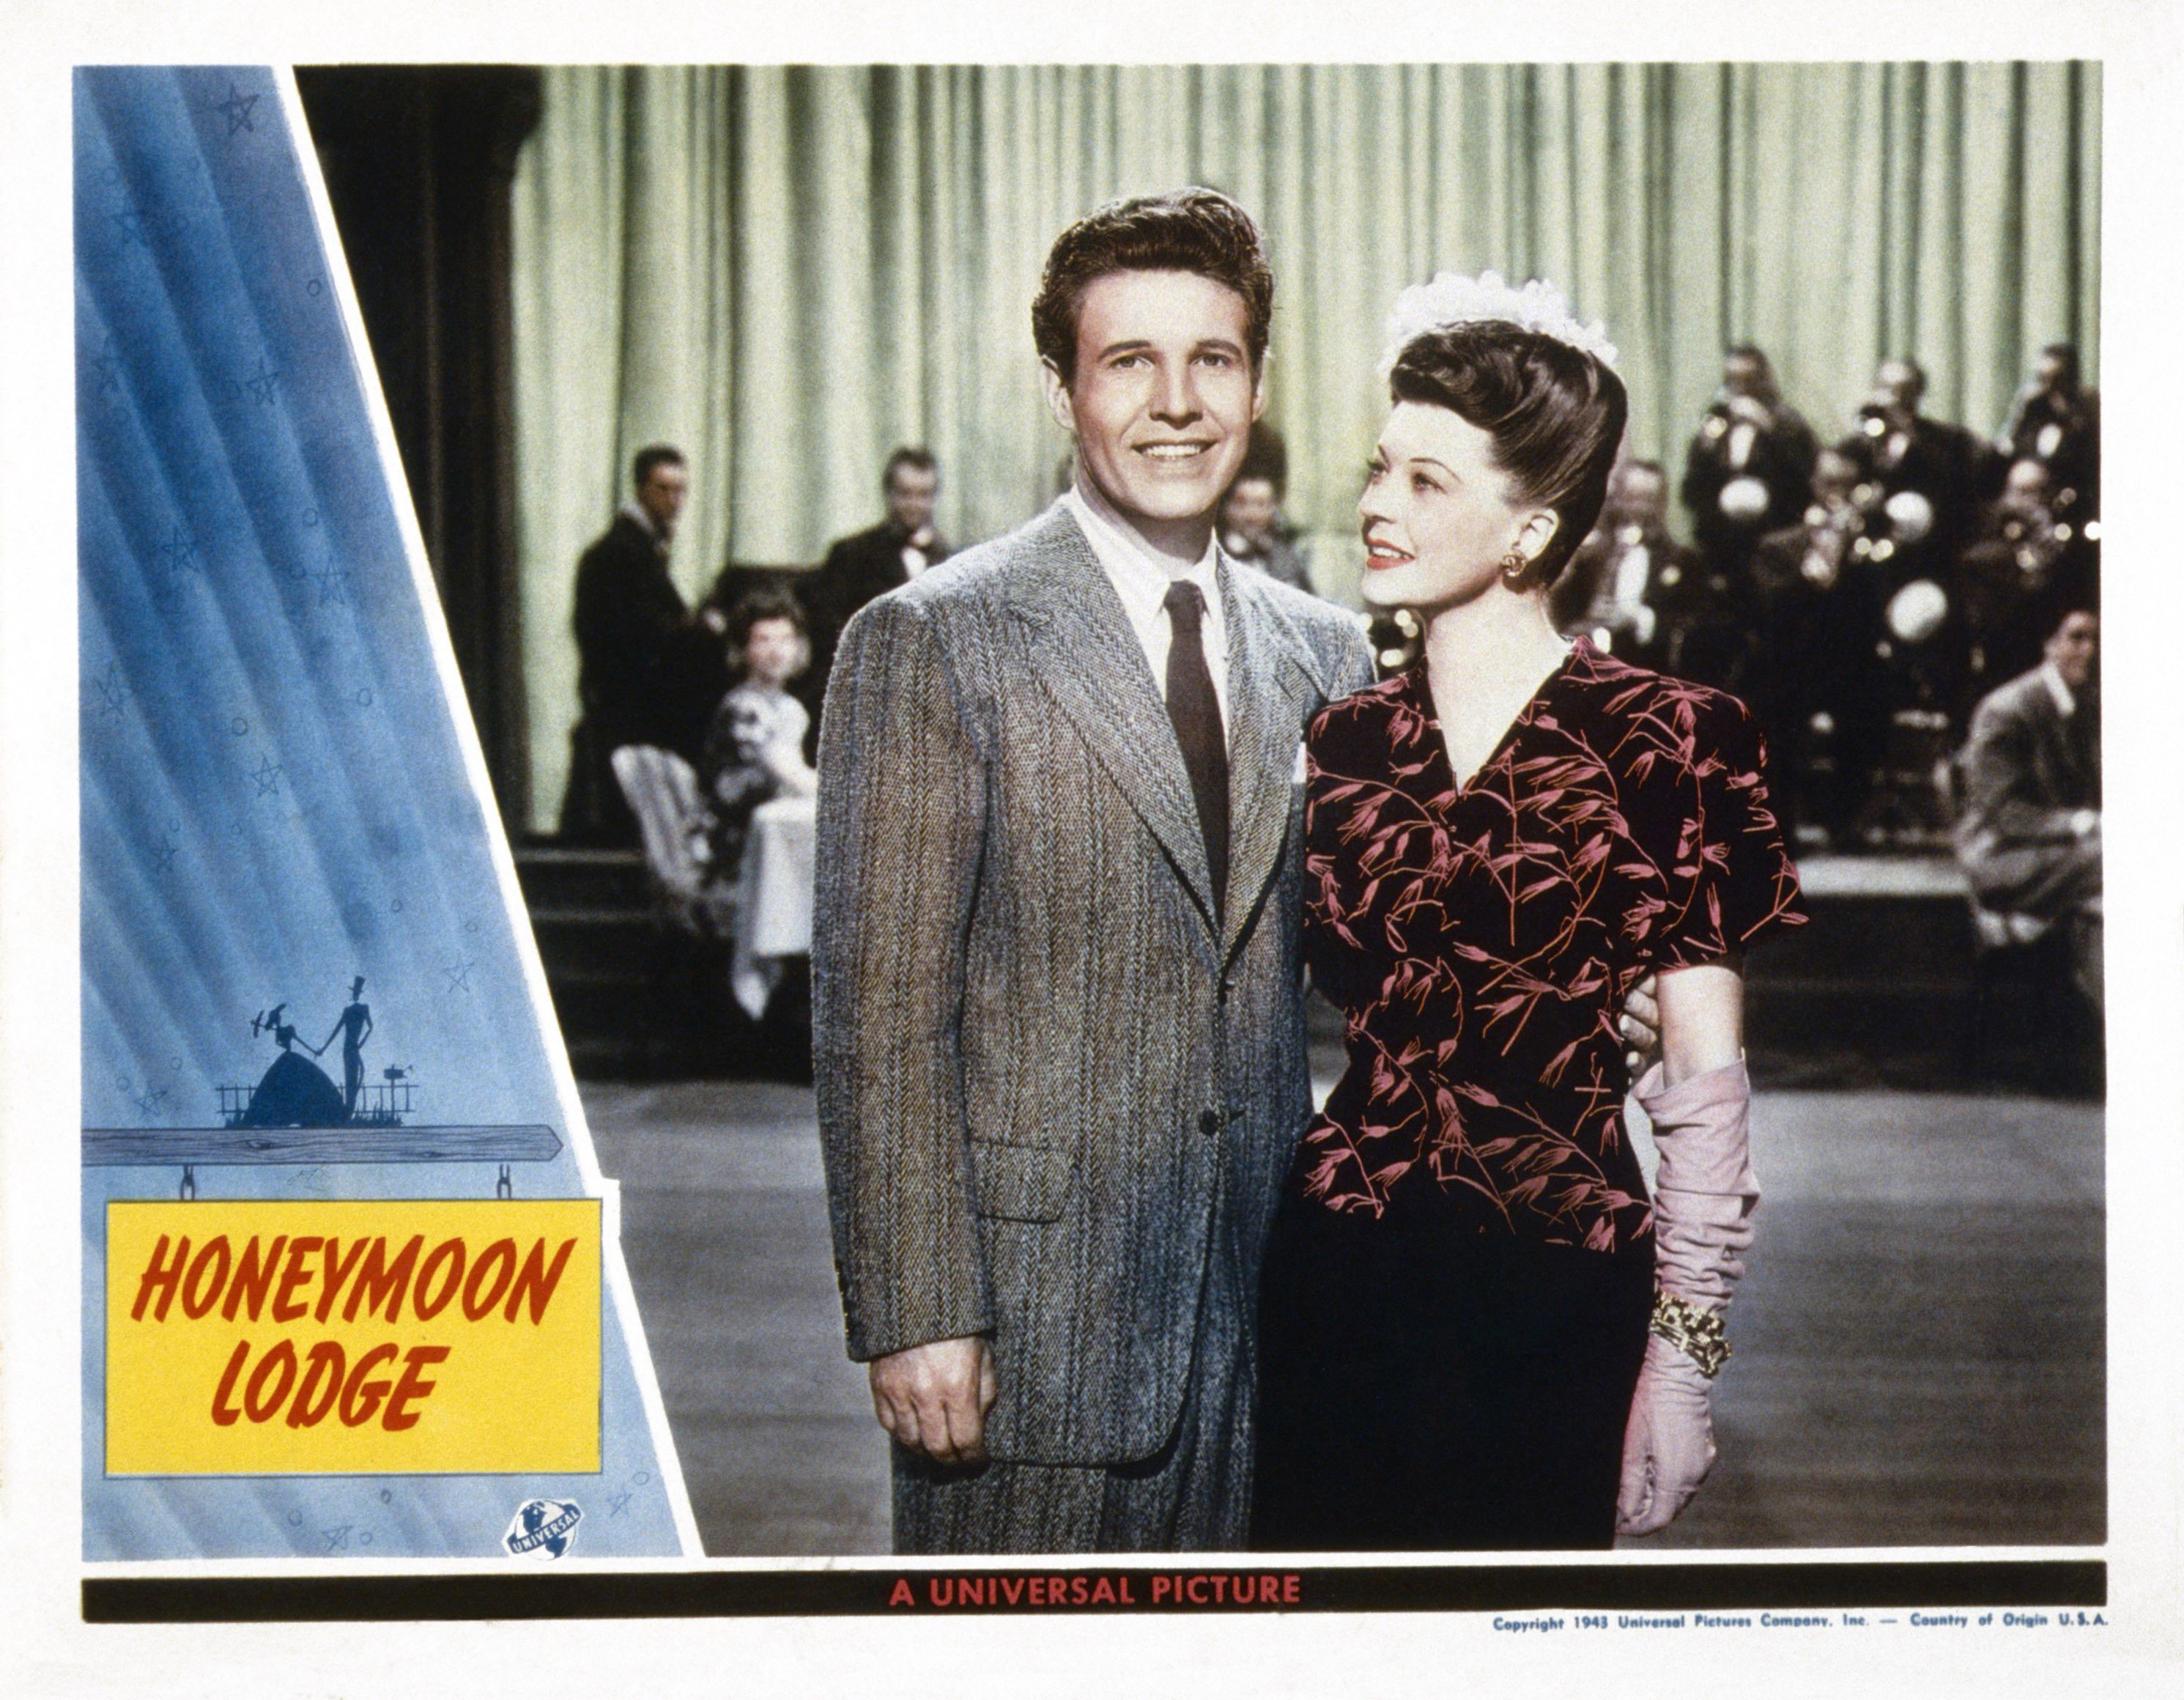 Ozzie Nelson and Harriet Hilliard in a Honeymoon Lodge, US lobby card, circa 1943. | Source: LMPC/Getty Images